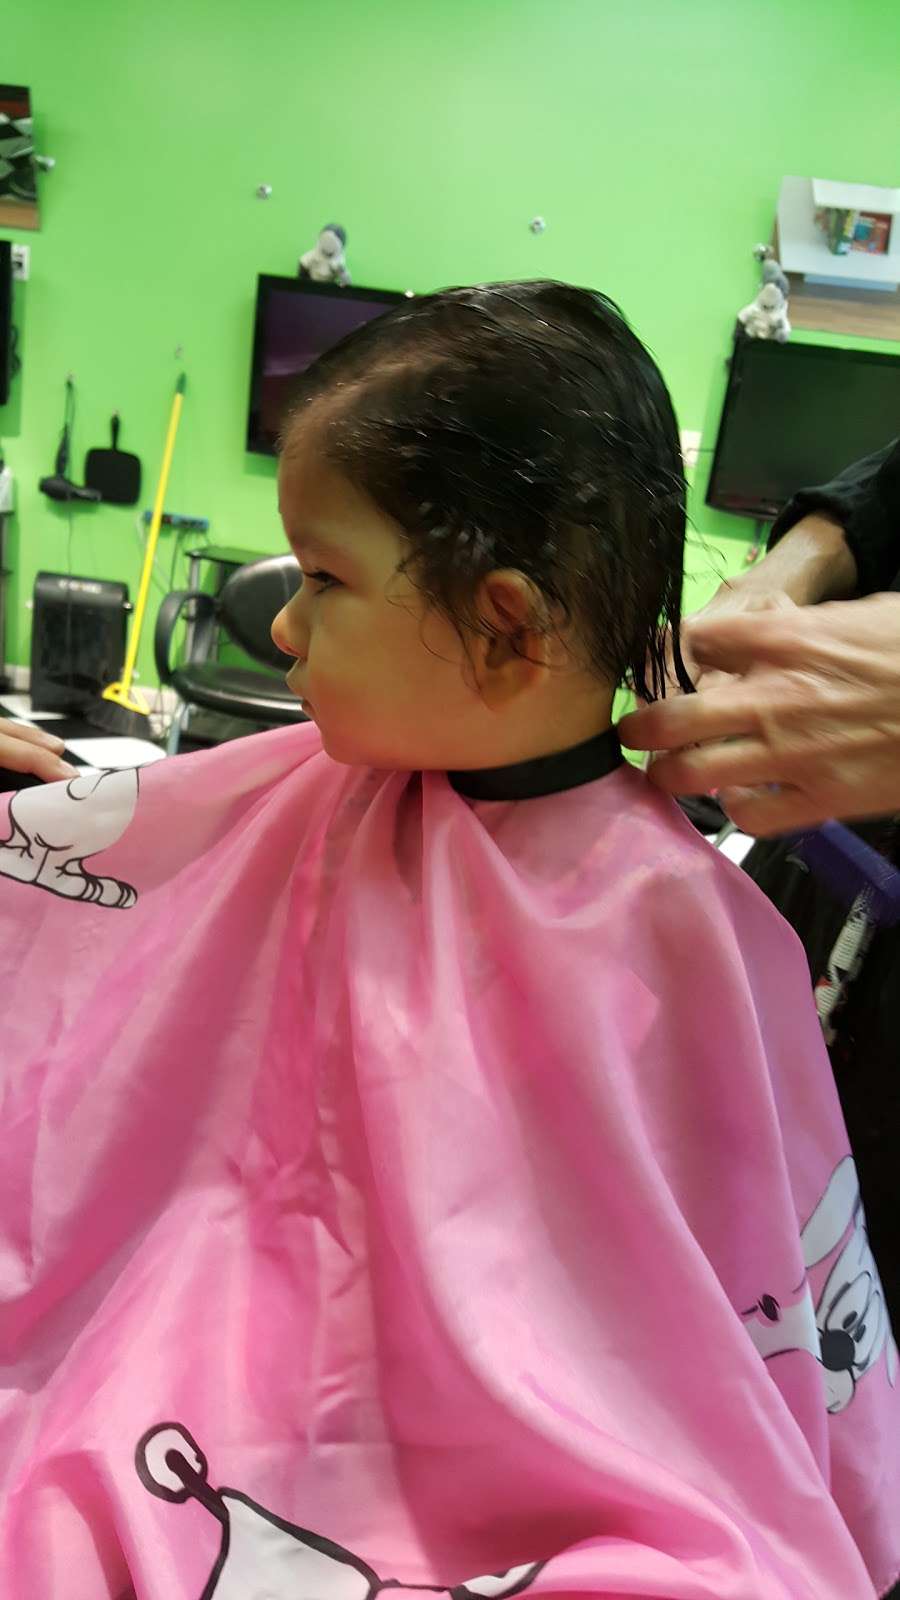 Sharkeys Cuts For Kids - New Britain PA | 418 Town Center, New Britain, PA 18901, USA | Phone: (215) 348-8528